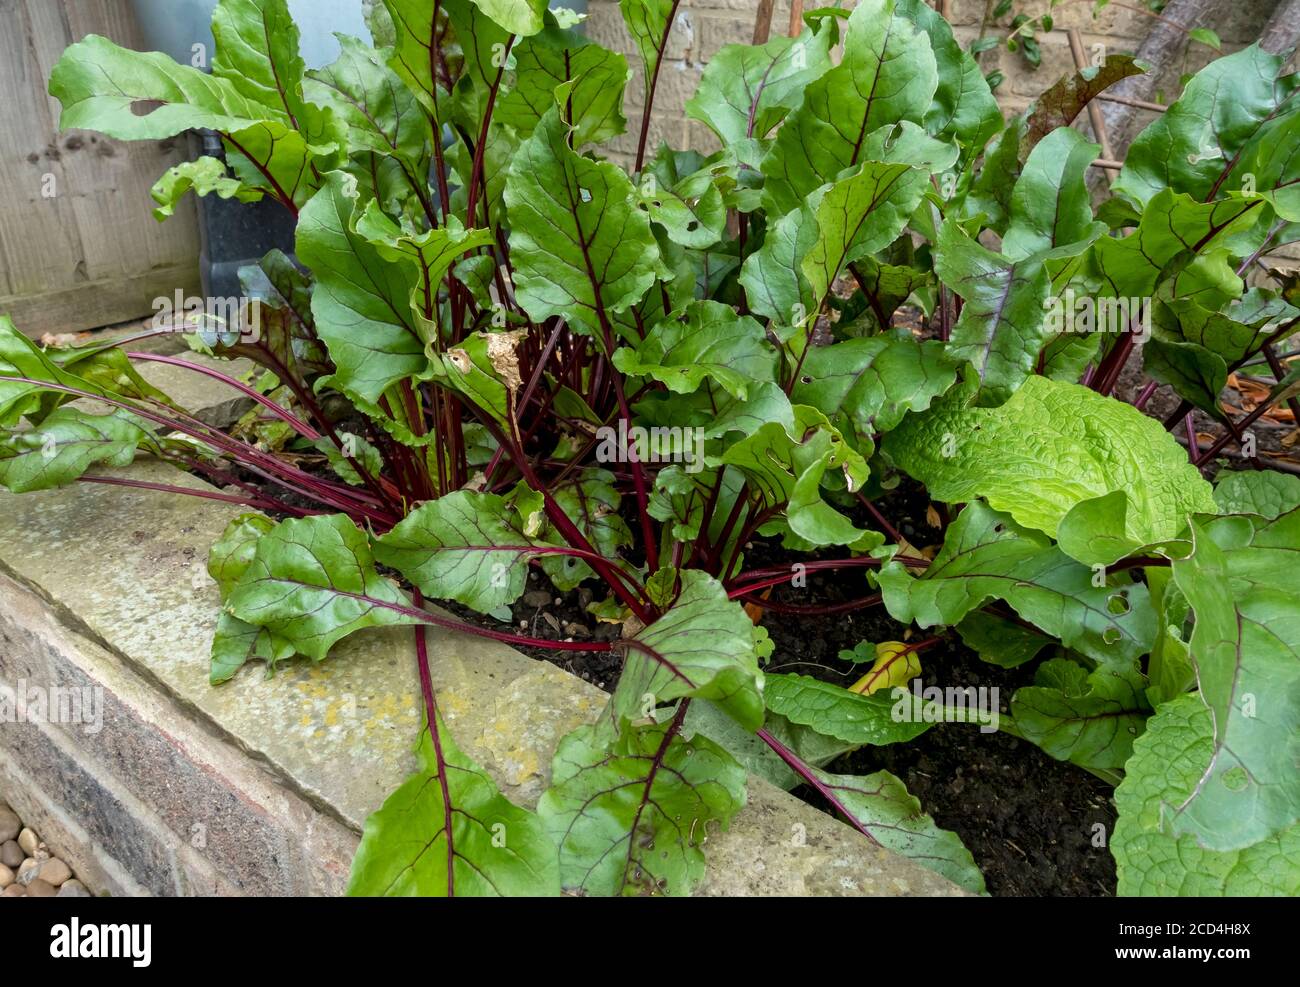 Beetroot vegetables veg plants (beta vulgaris) growing in a raised bed in the garden allotment in summer England UK United Kingdom GB Great Britain Stock Photo